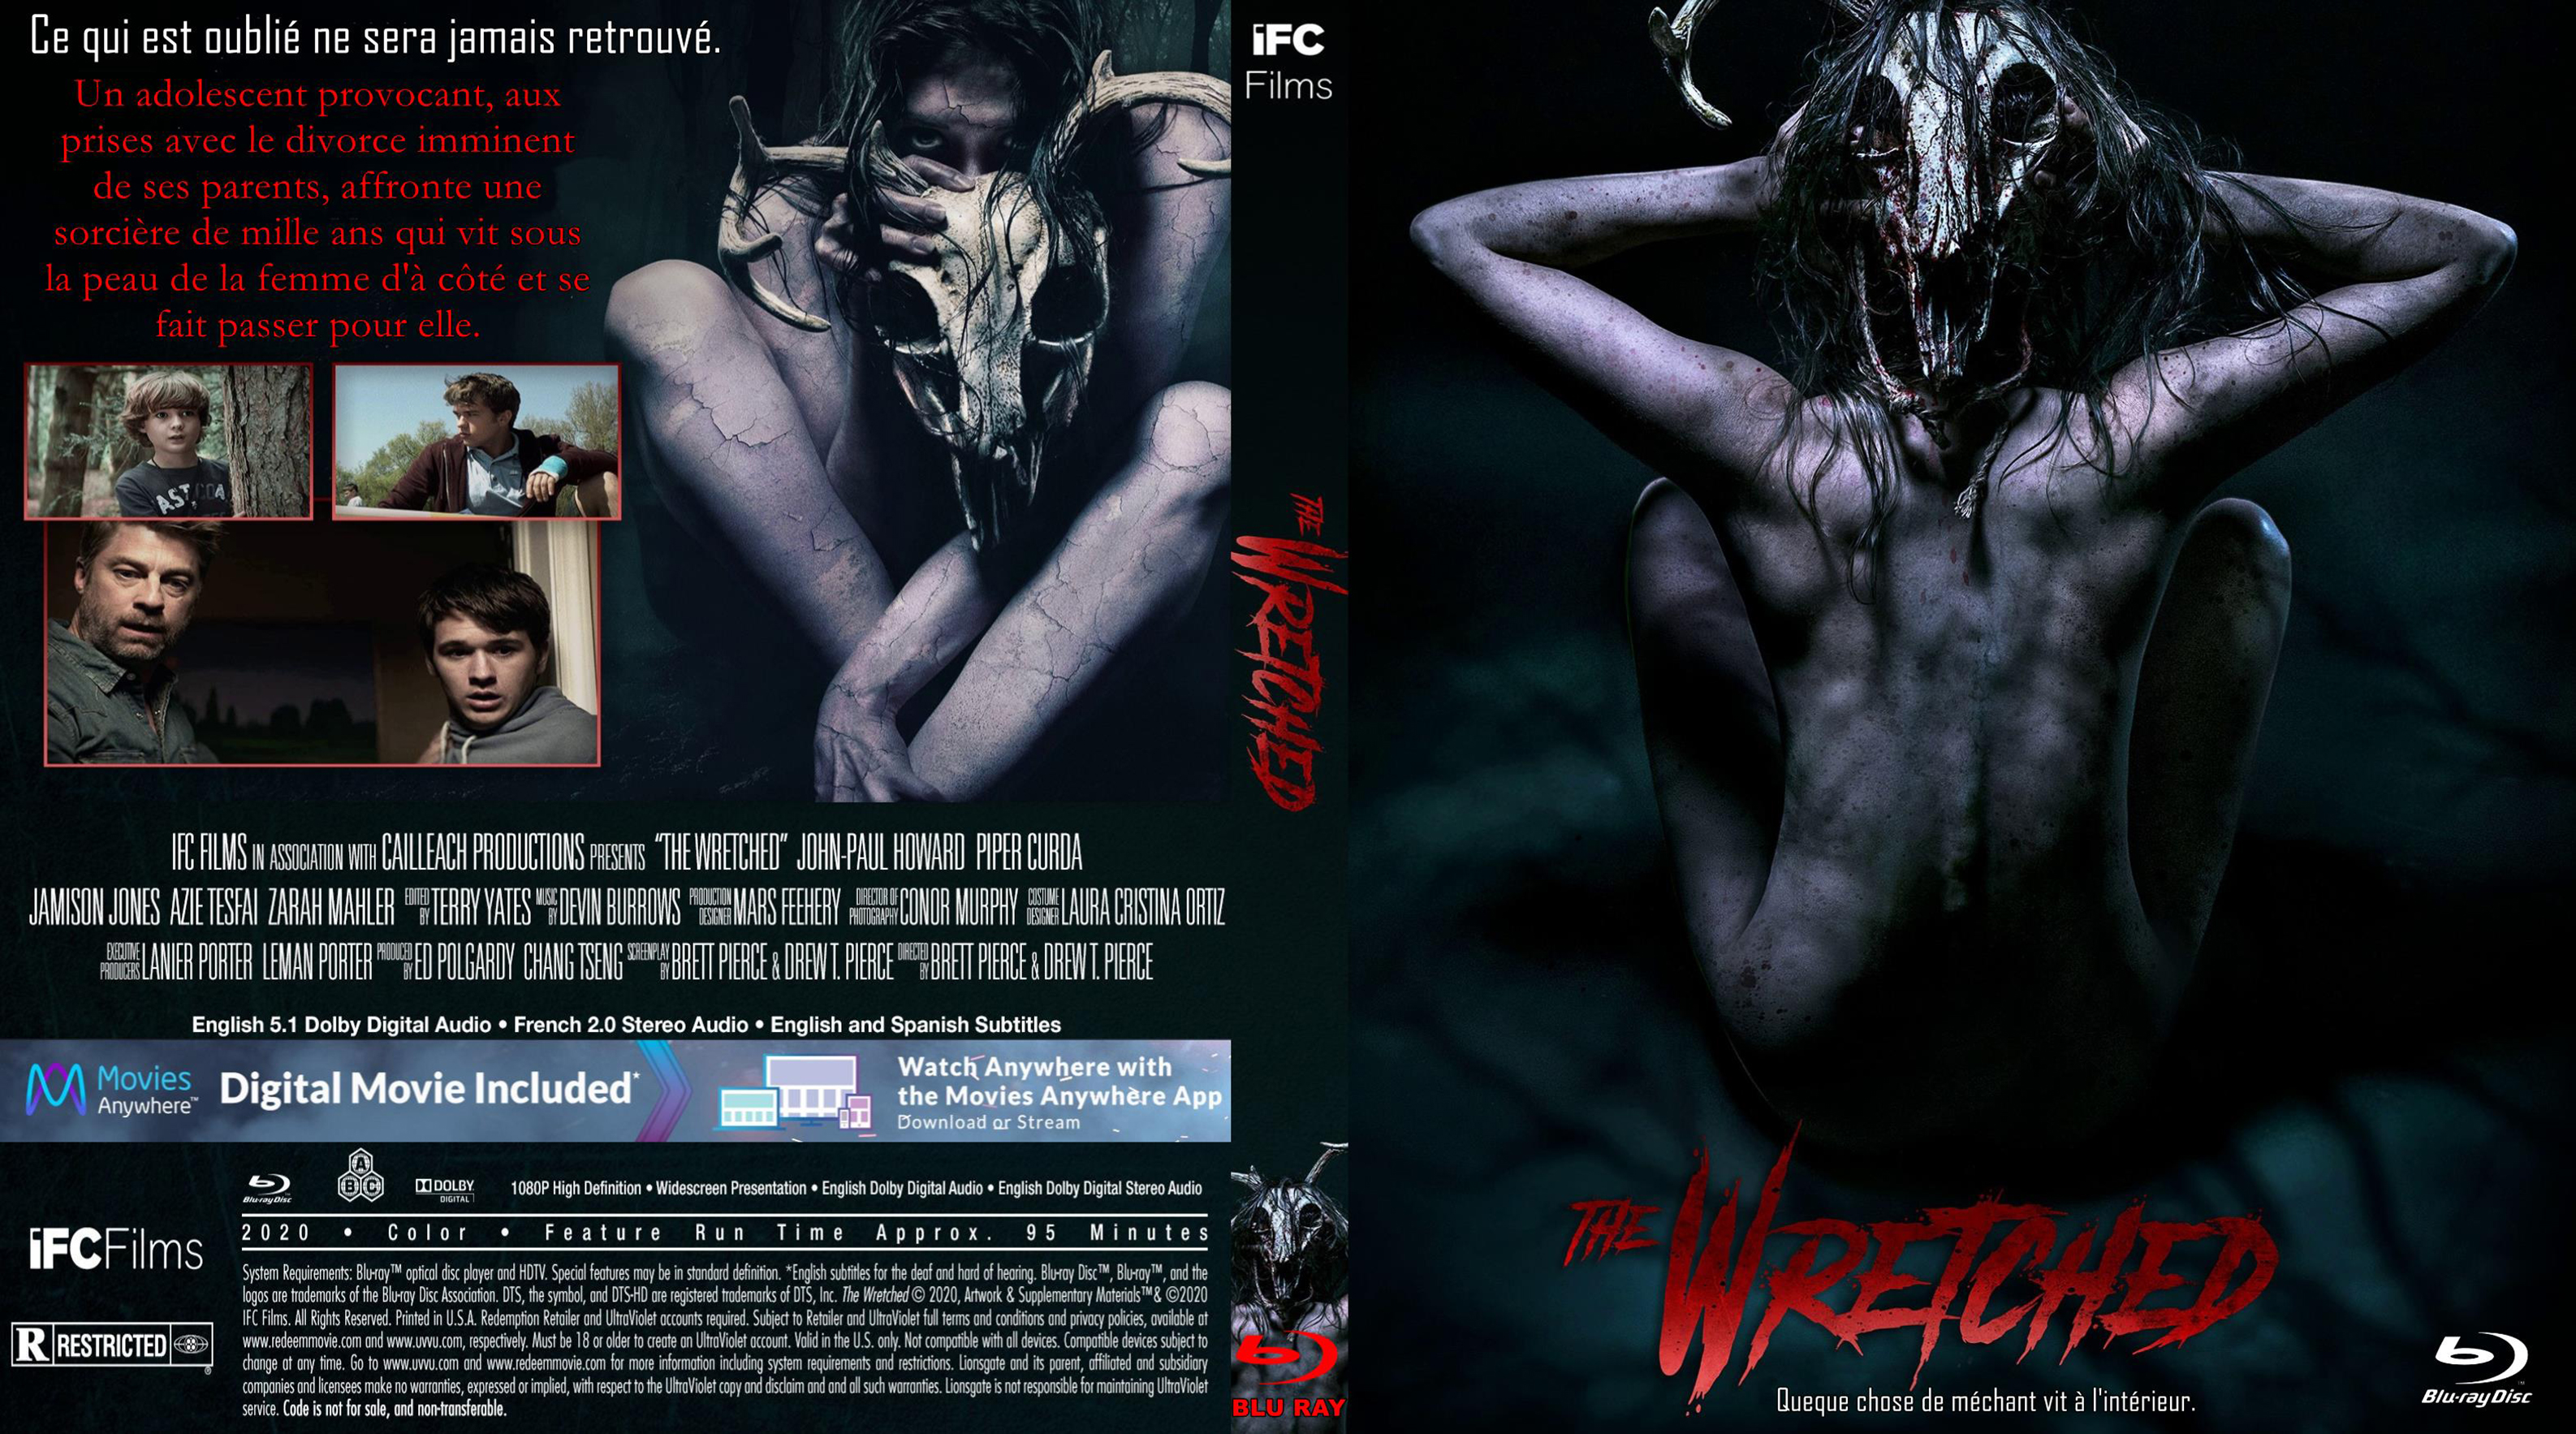 Jaquette DVD The wretched custom (BLU-RAY)